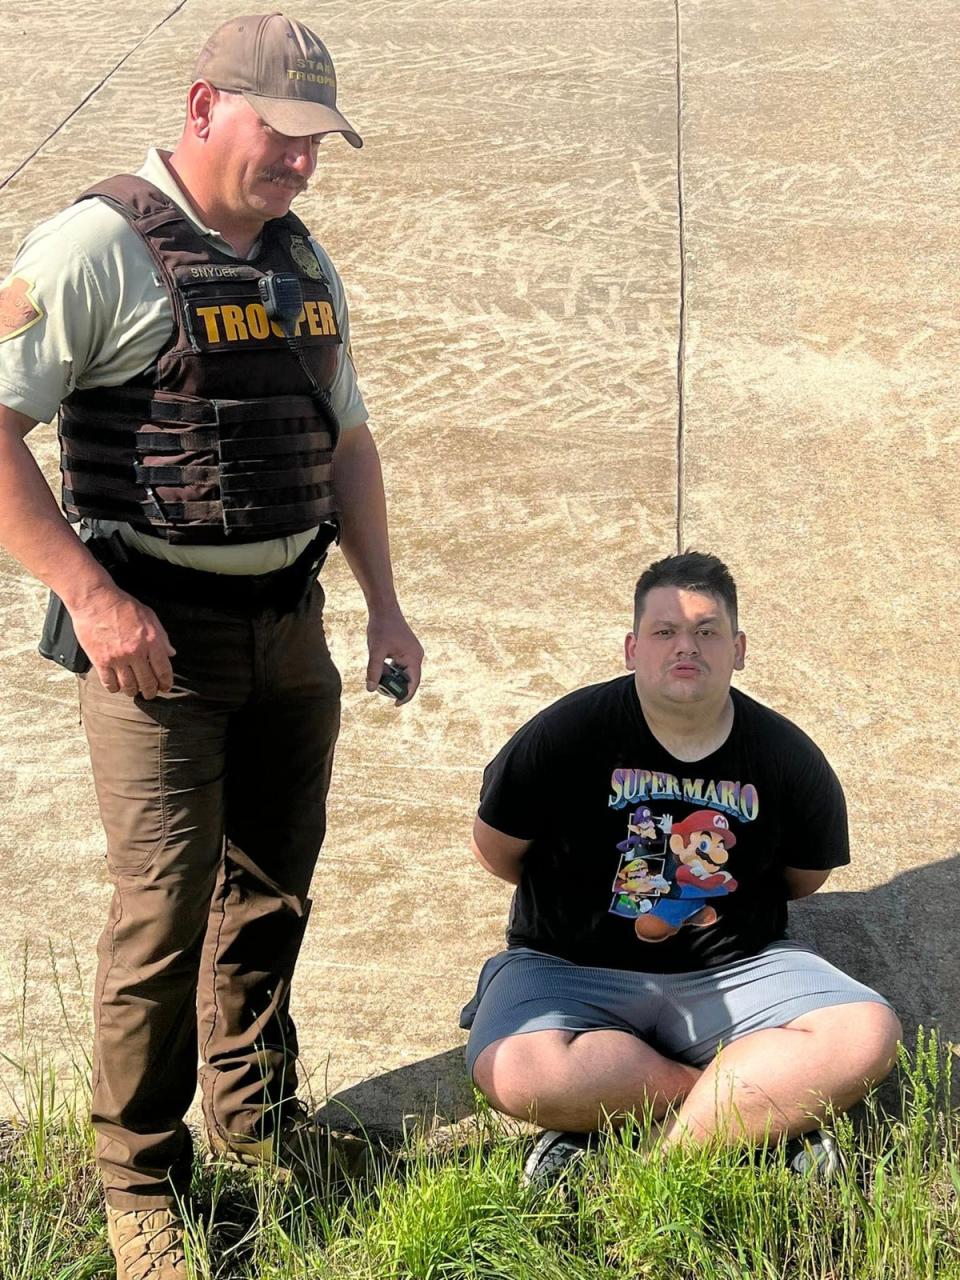 Trooper Matt Snyder from the Oklahoma Highway Patrol received Beck’s unprompted confession on the side of the highway (Oklahoma Highway Patrol)